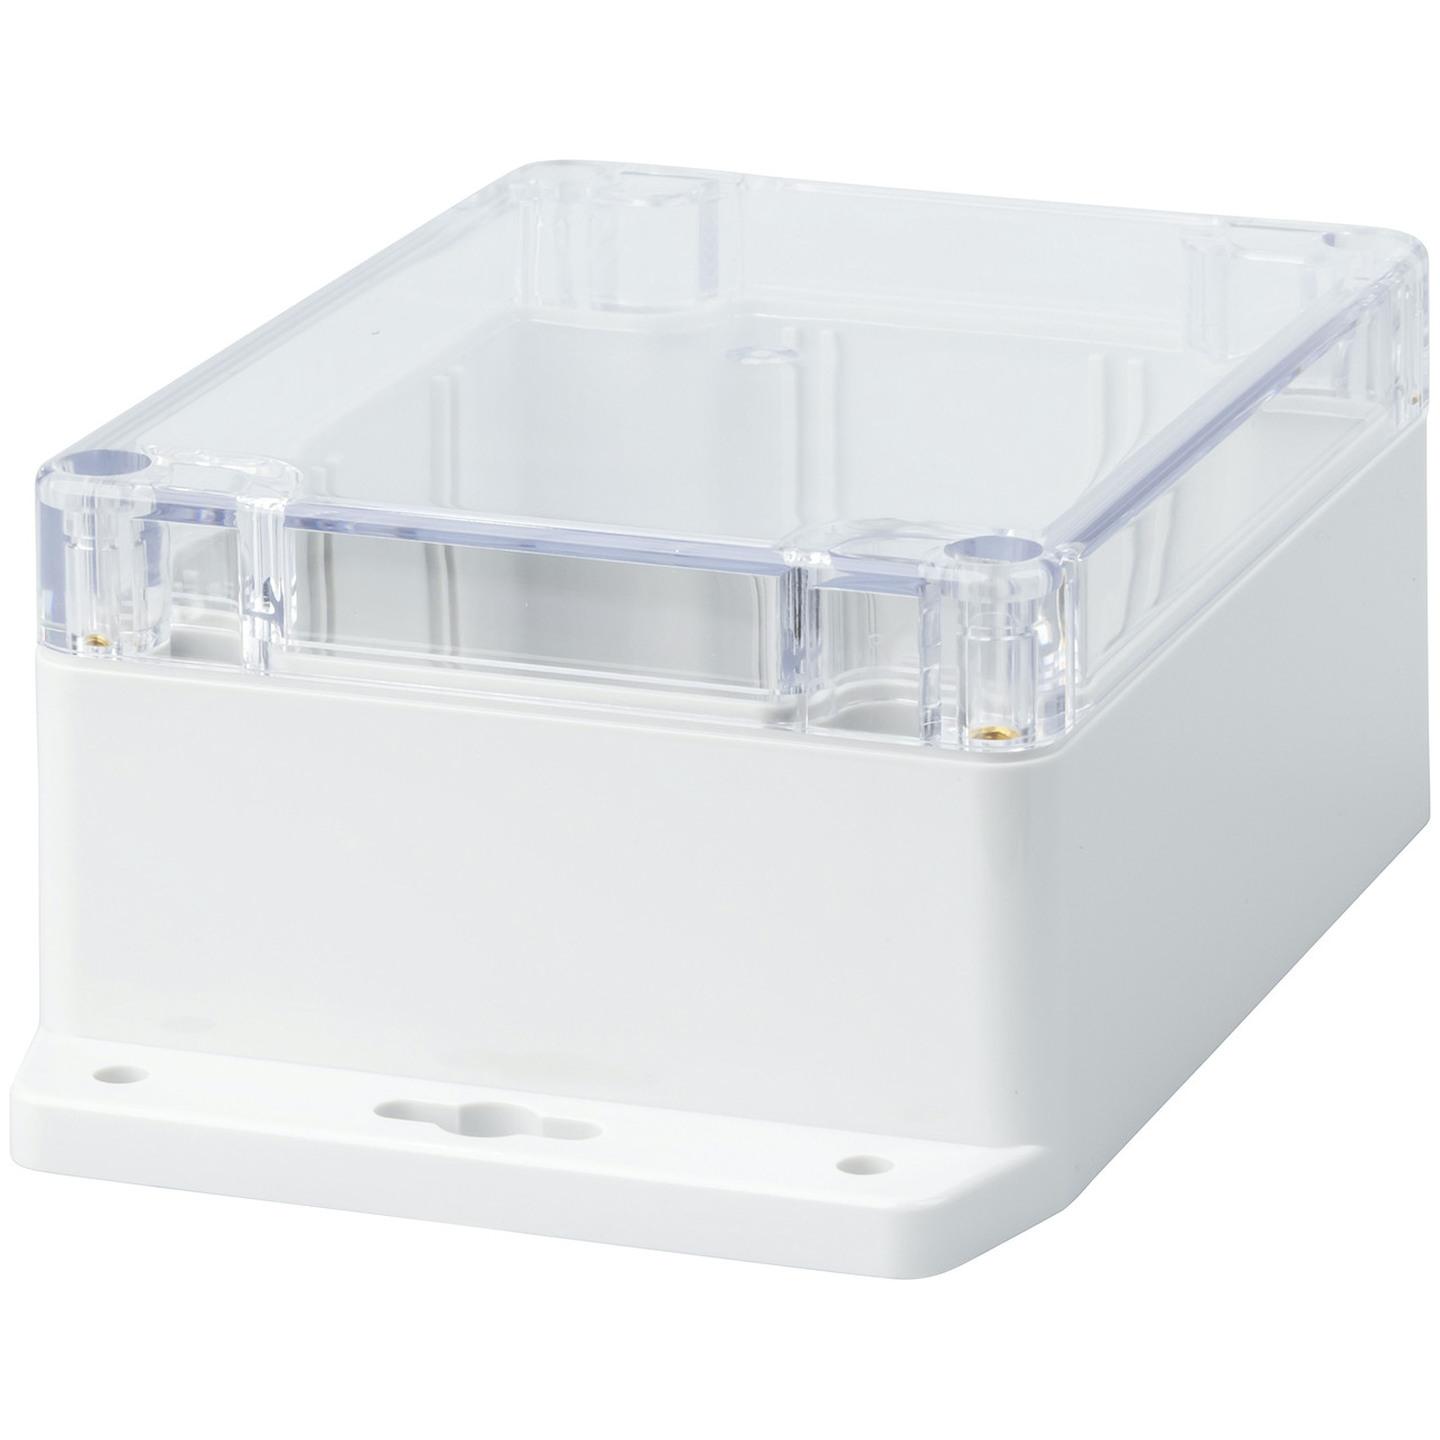 IP65 Sealed Polycarbonate Enclosure with Mounting Flange 115W x 90D x 55Hmm